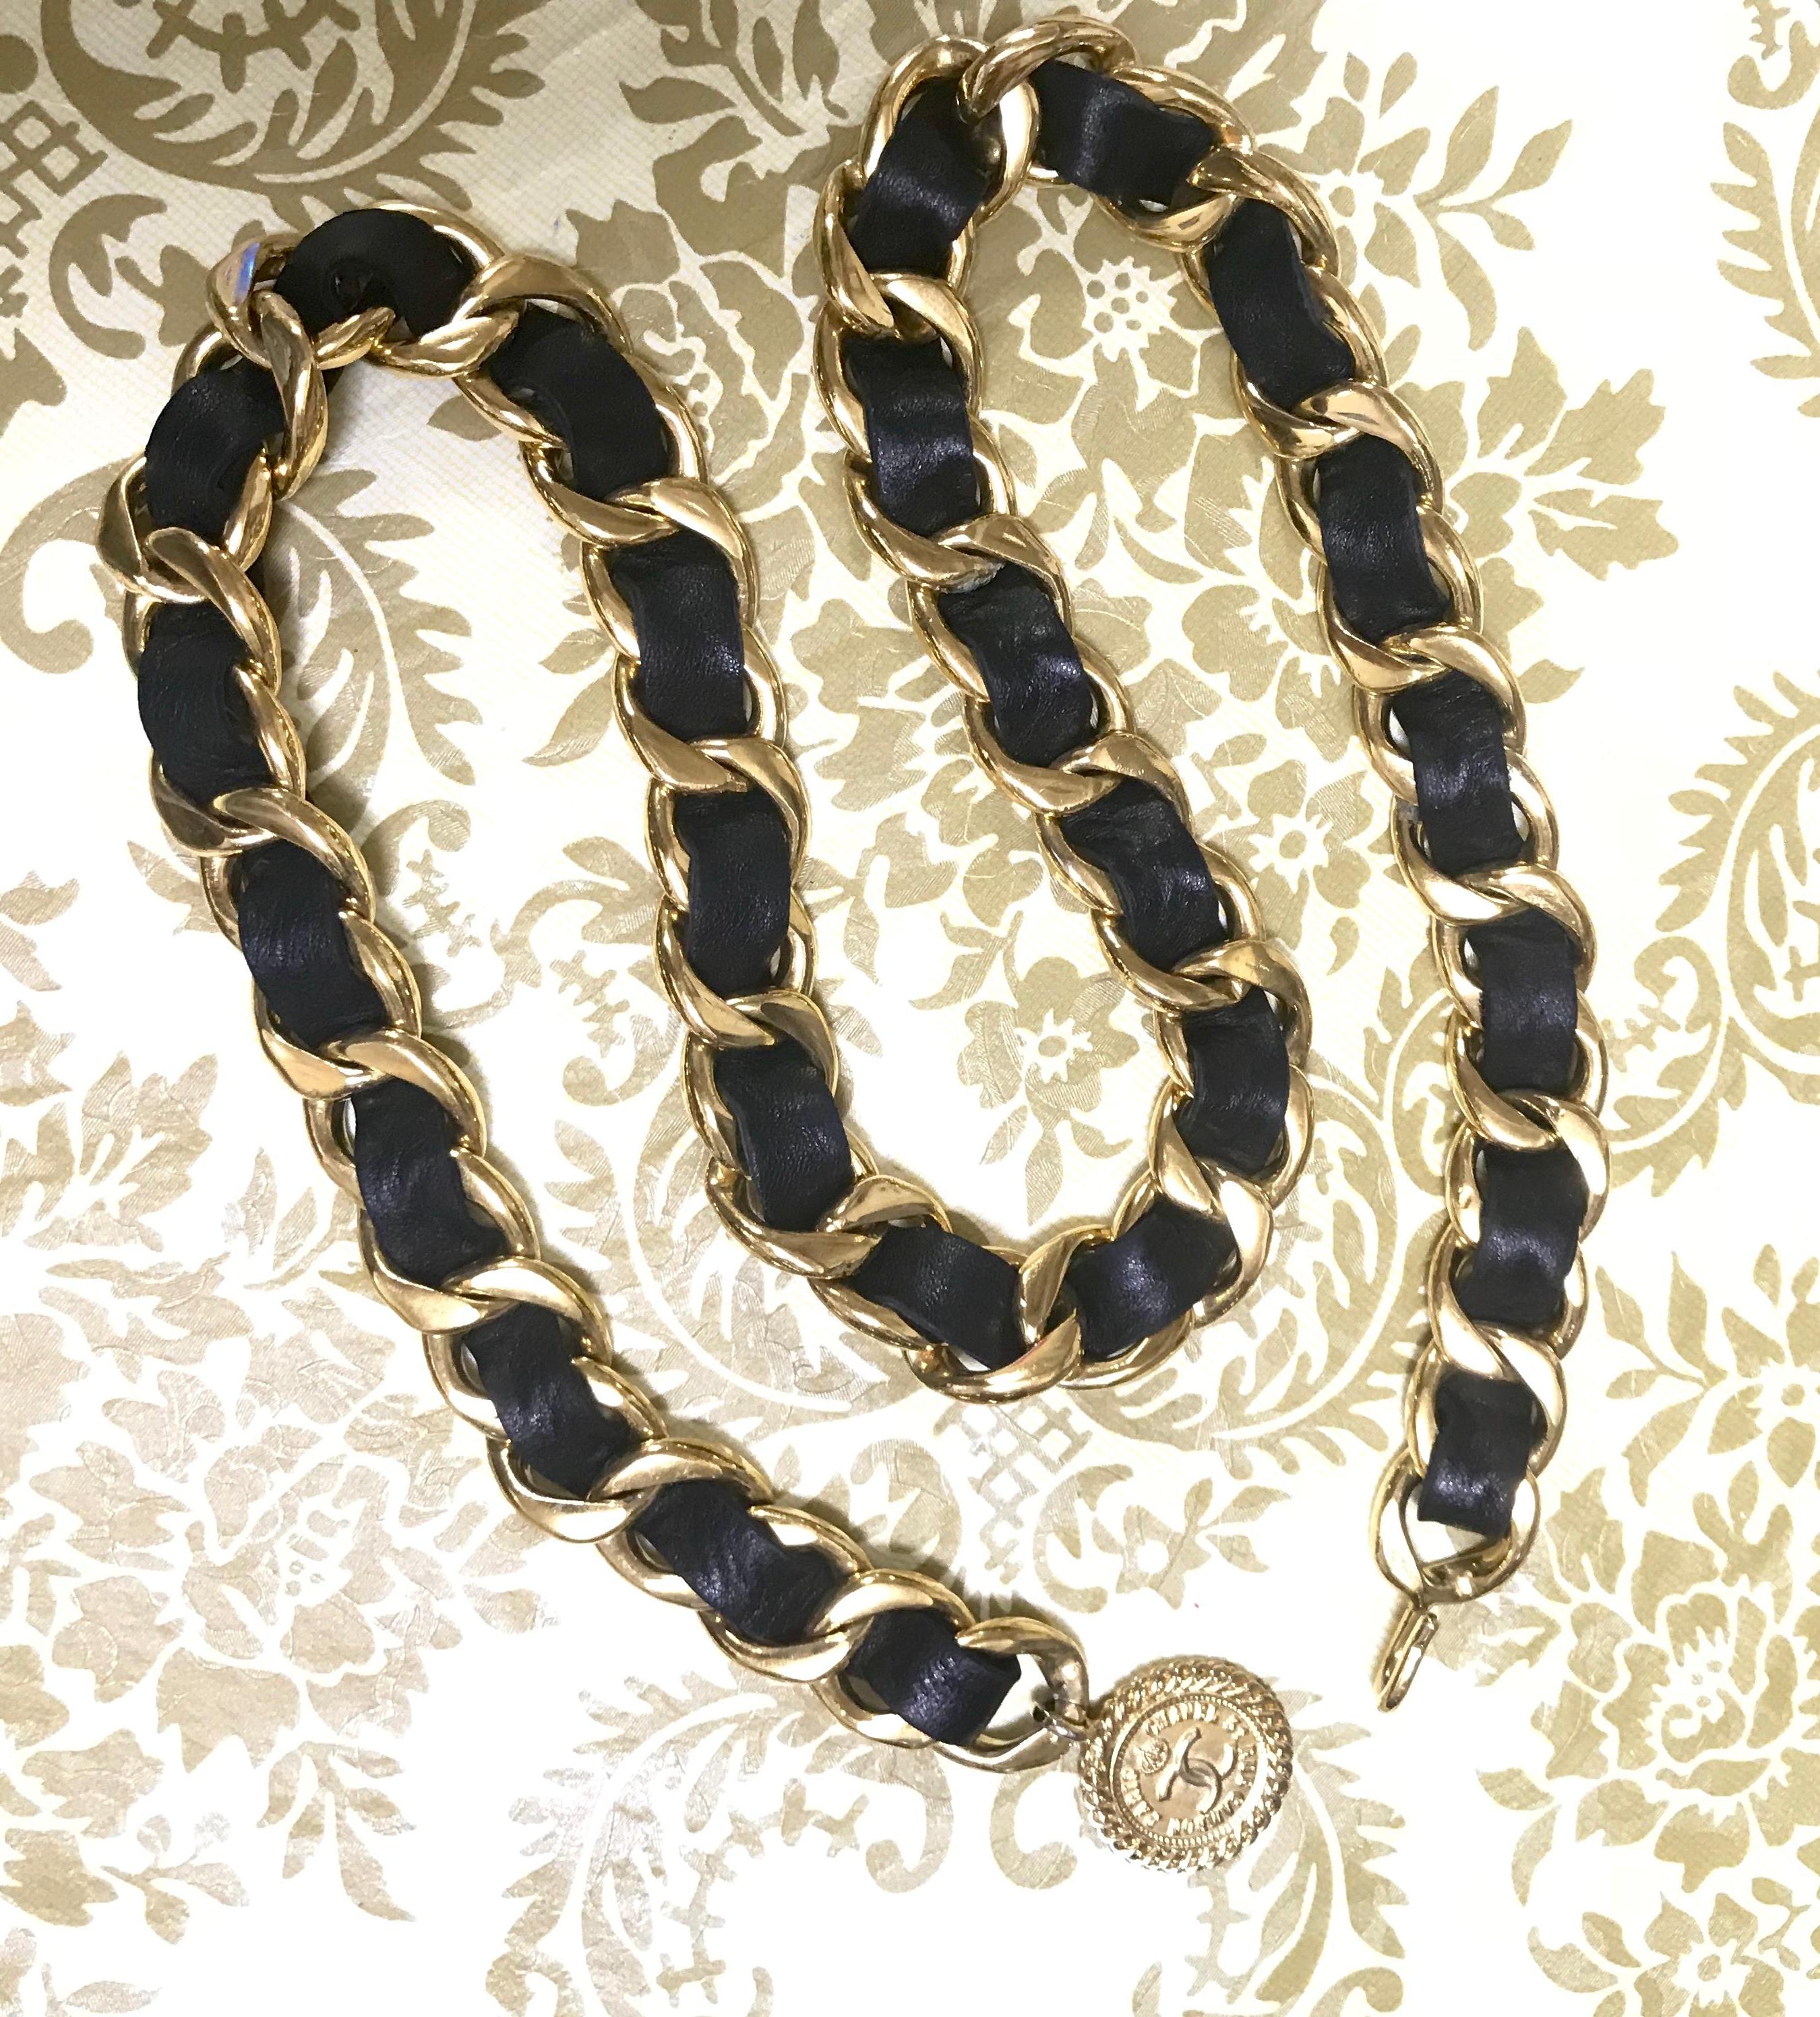 ****The beige version is also for sale***

1980s. Vintage CHANEL black leather thick chain belt with golden CC and mademoiselle charm. 
Nice and heavy single layer chain belt from CHANEL.

Introducing a nice and heavy black leather thick chain belt